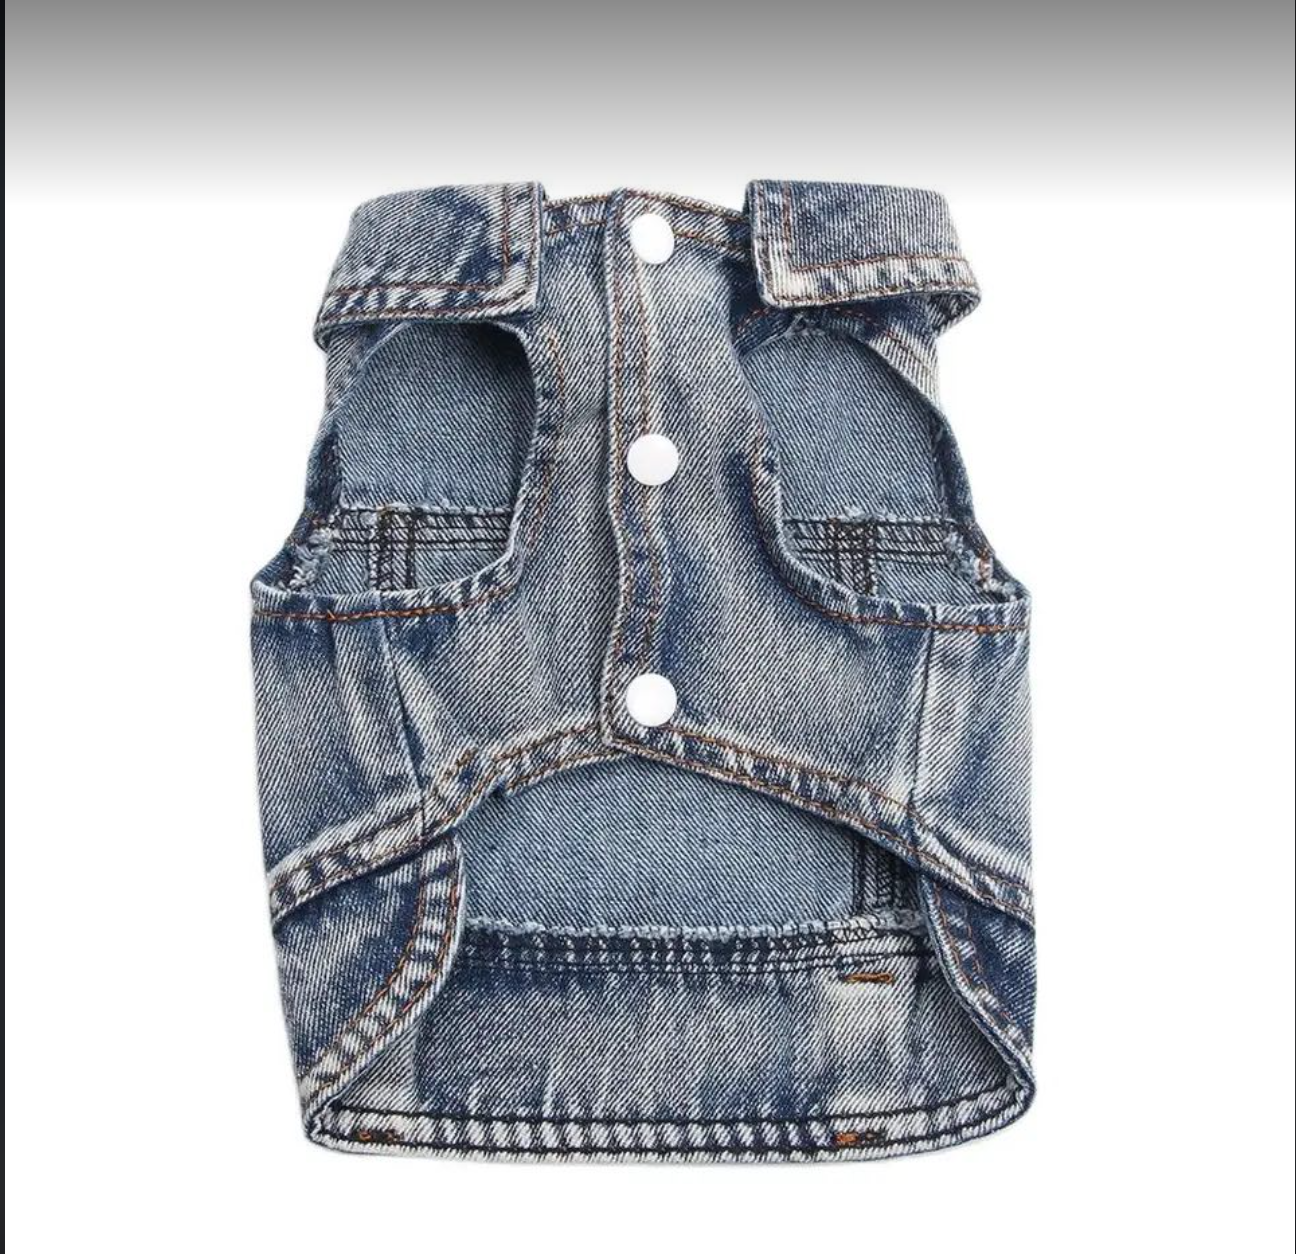 The jeans vest with a D-ring